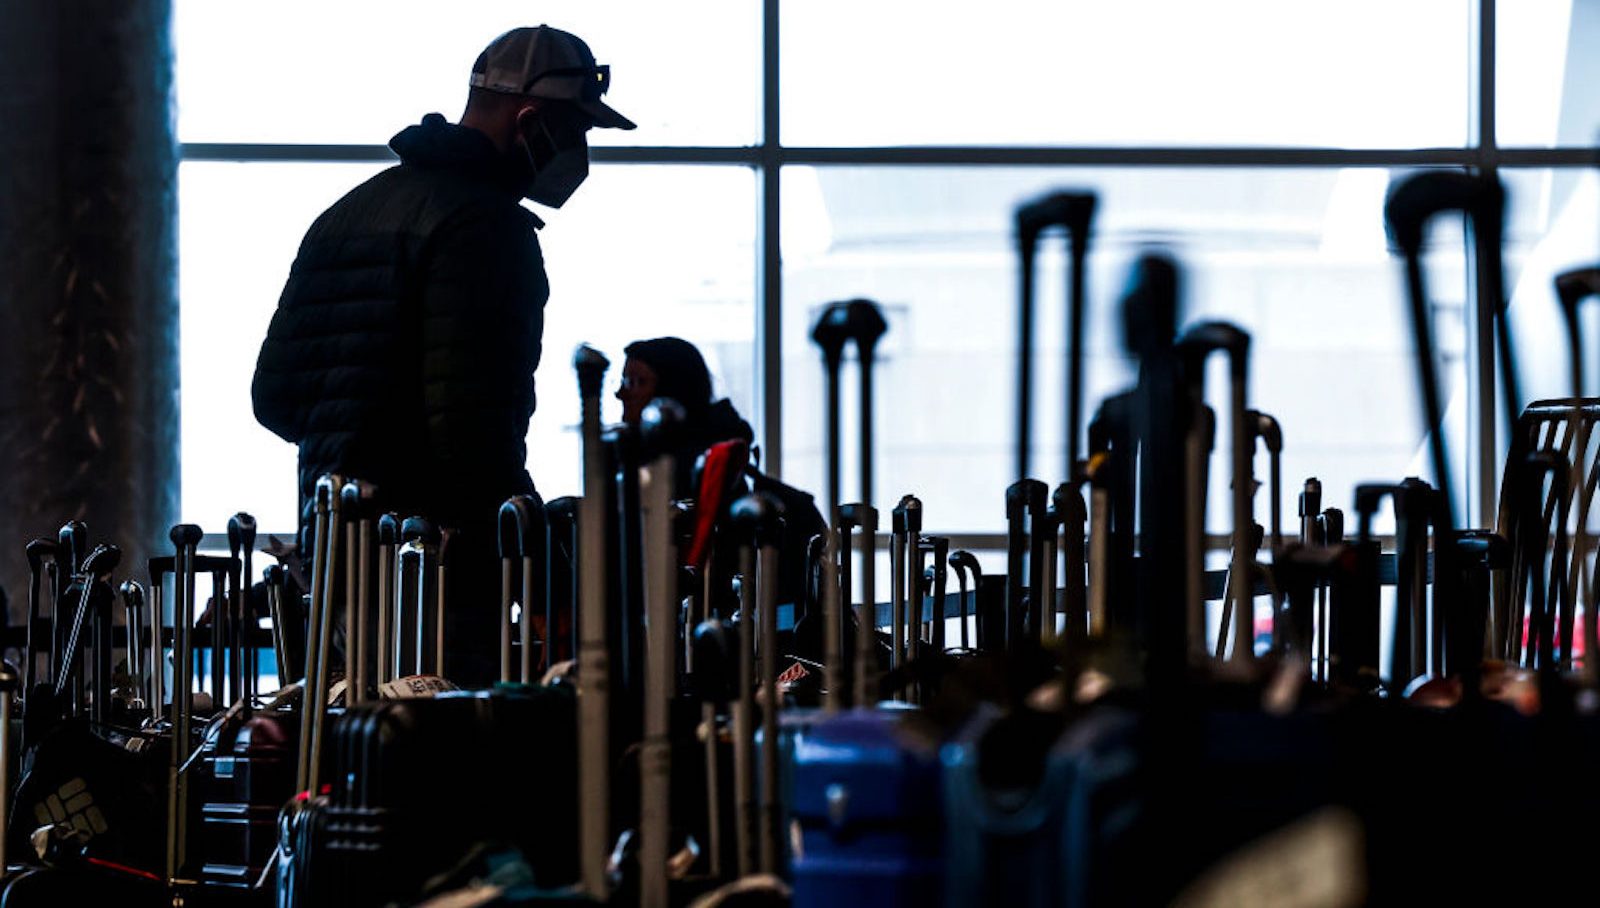 More than 1,600 flights have been canceled in the US due to the winter storm